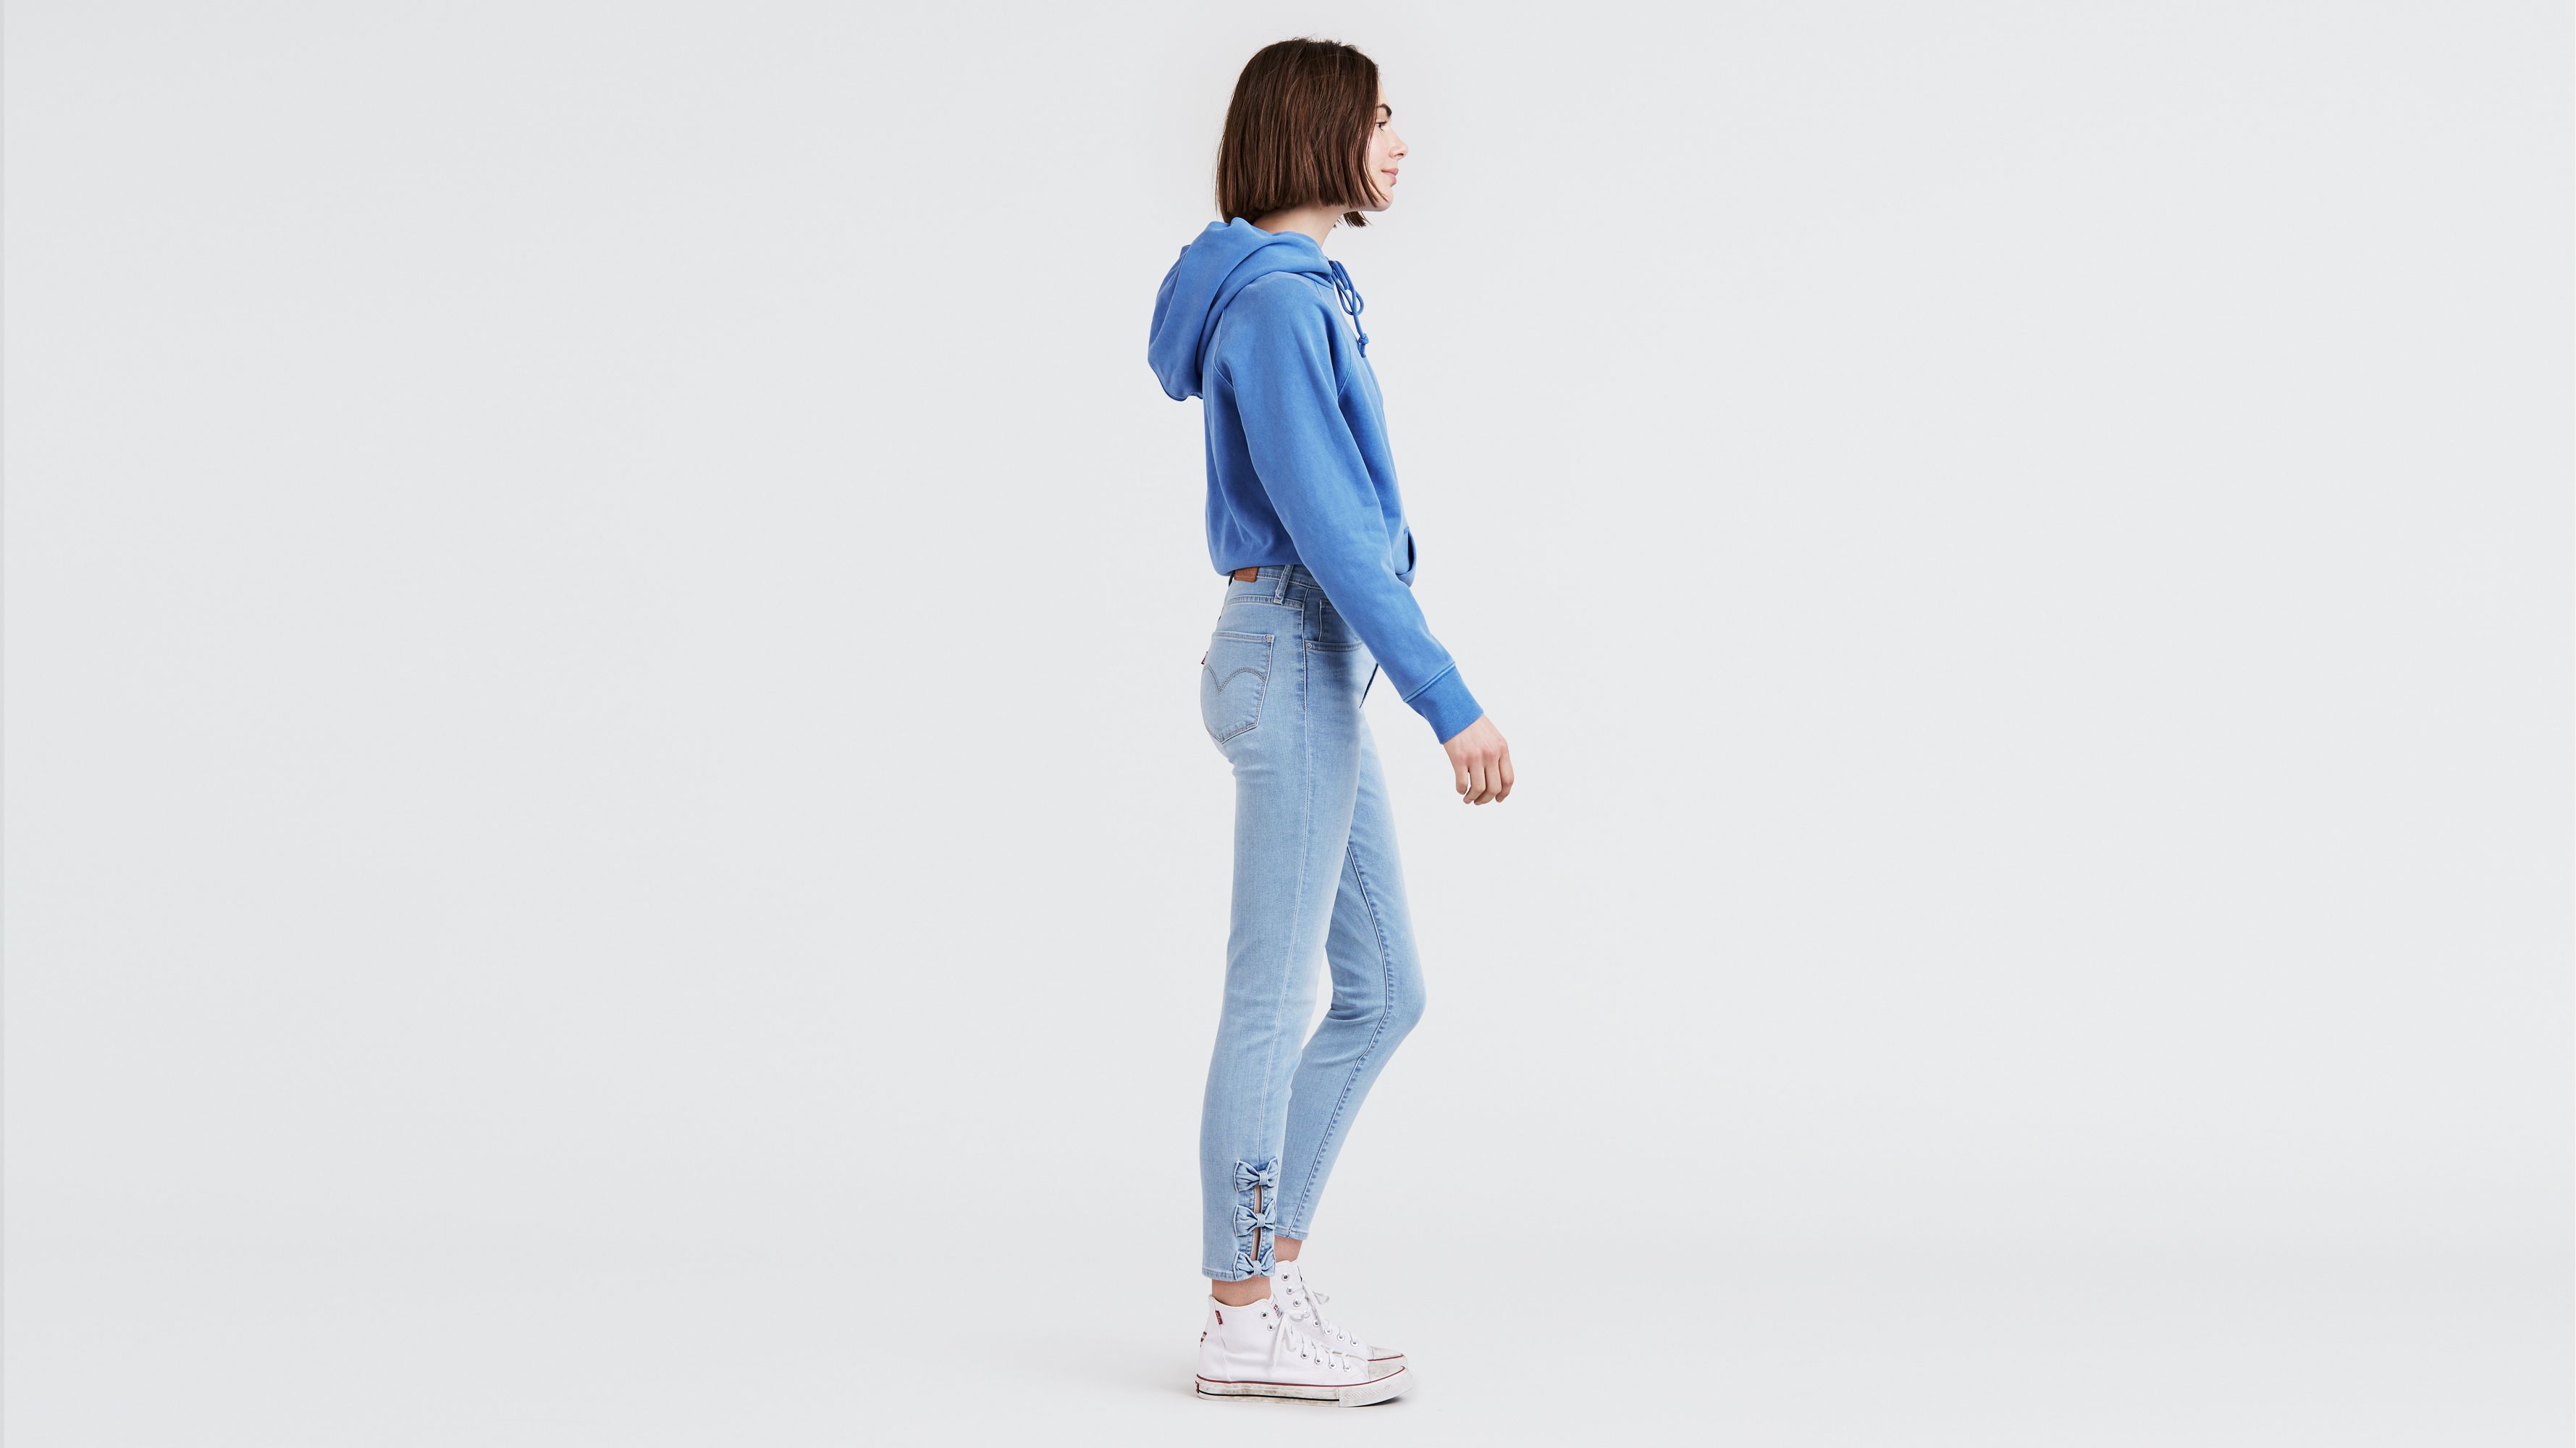 721 high rise skinny jeans with ankle bows